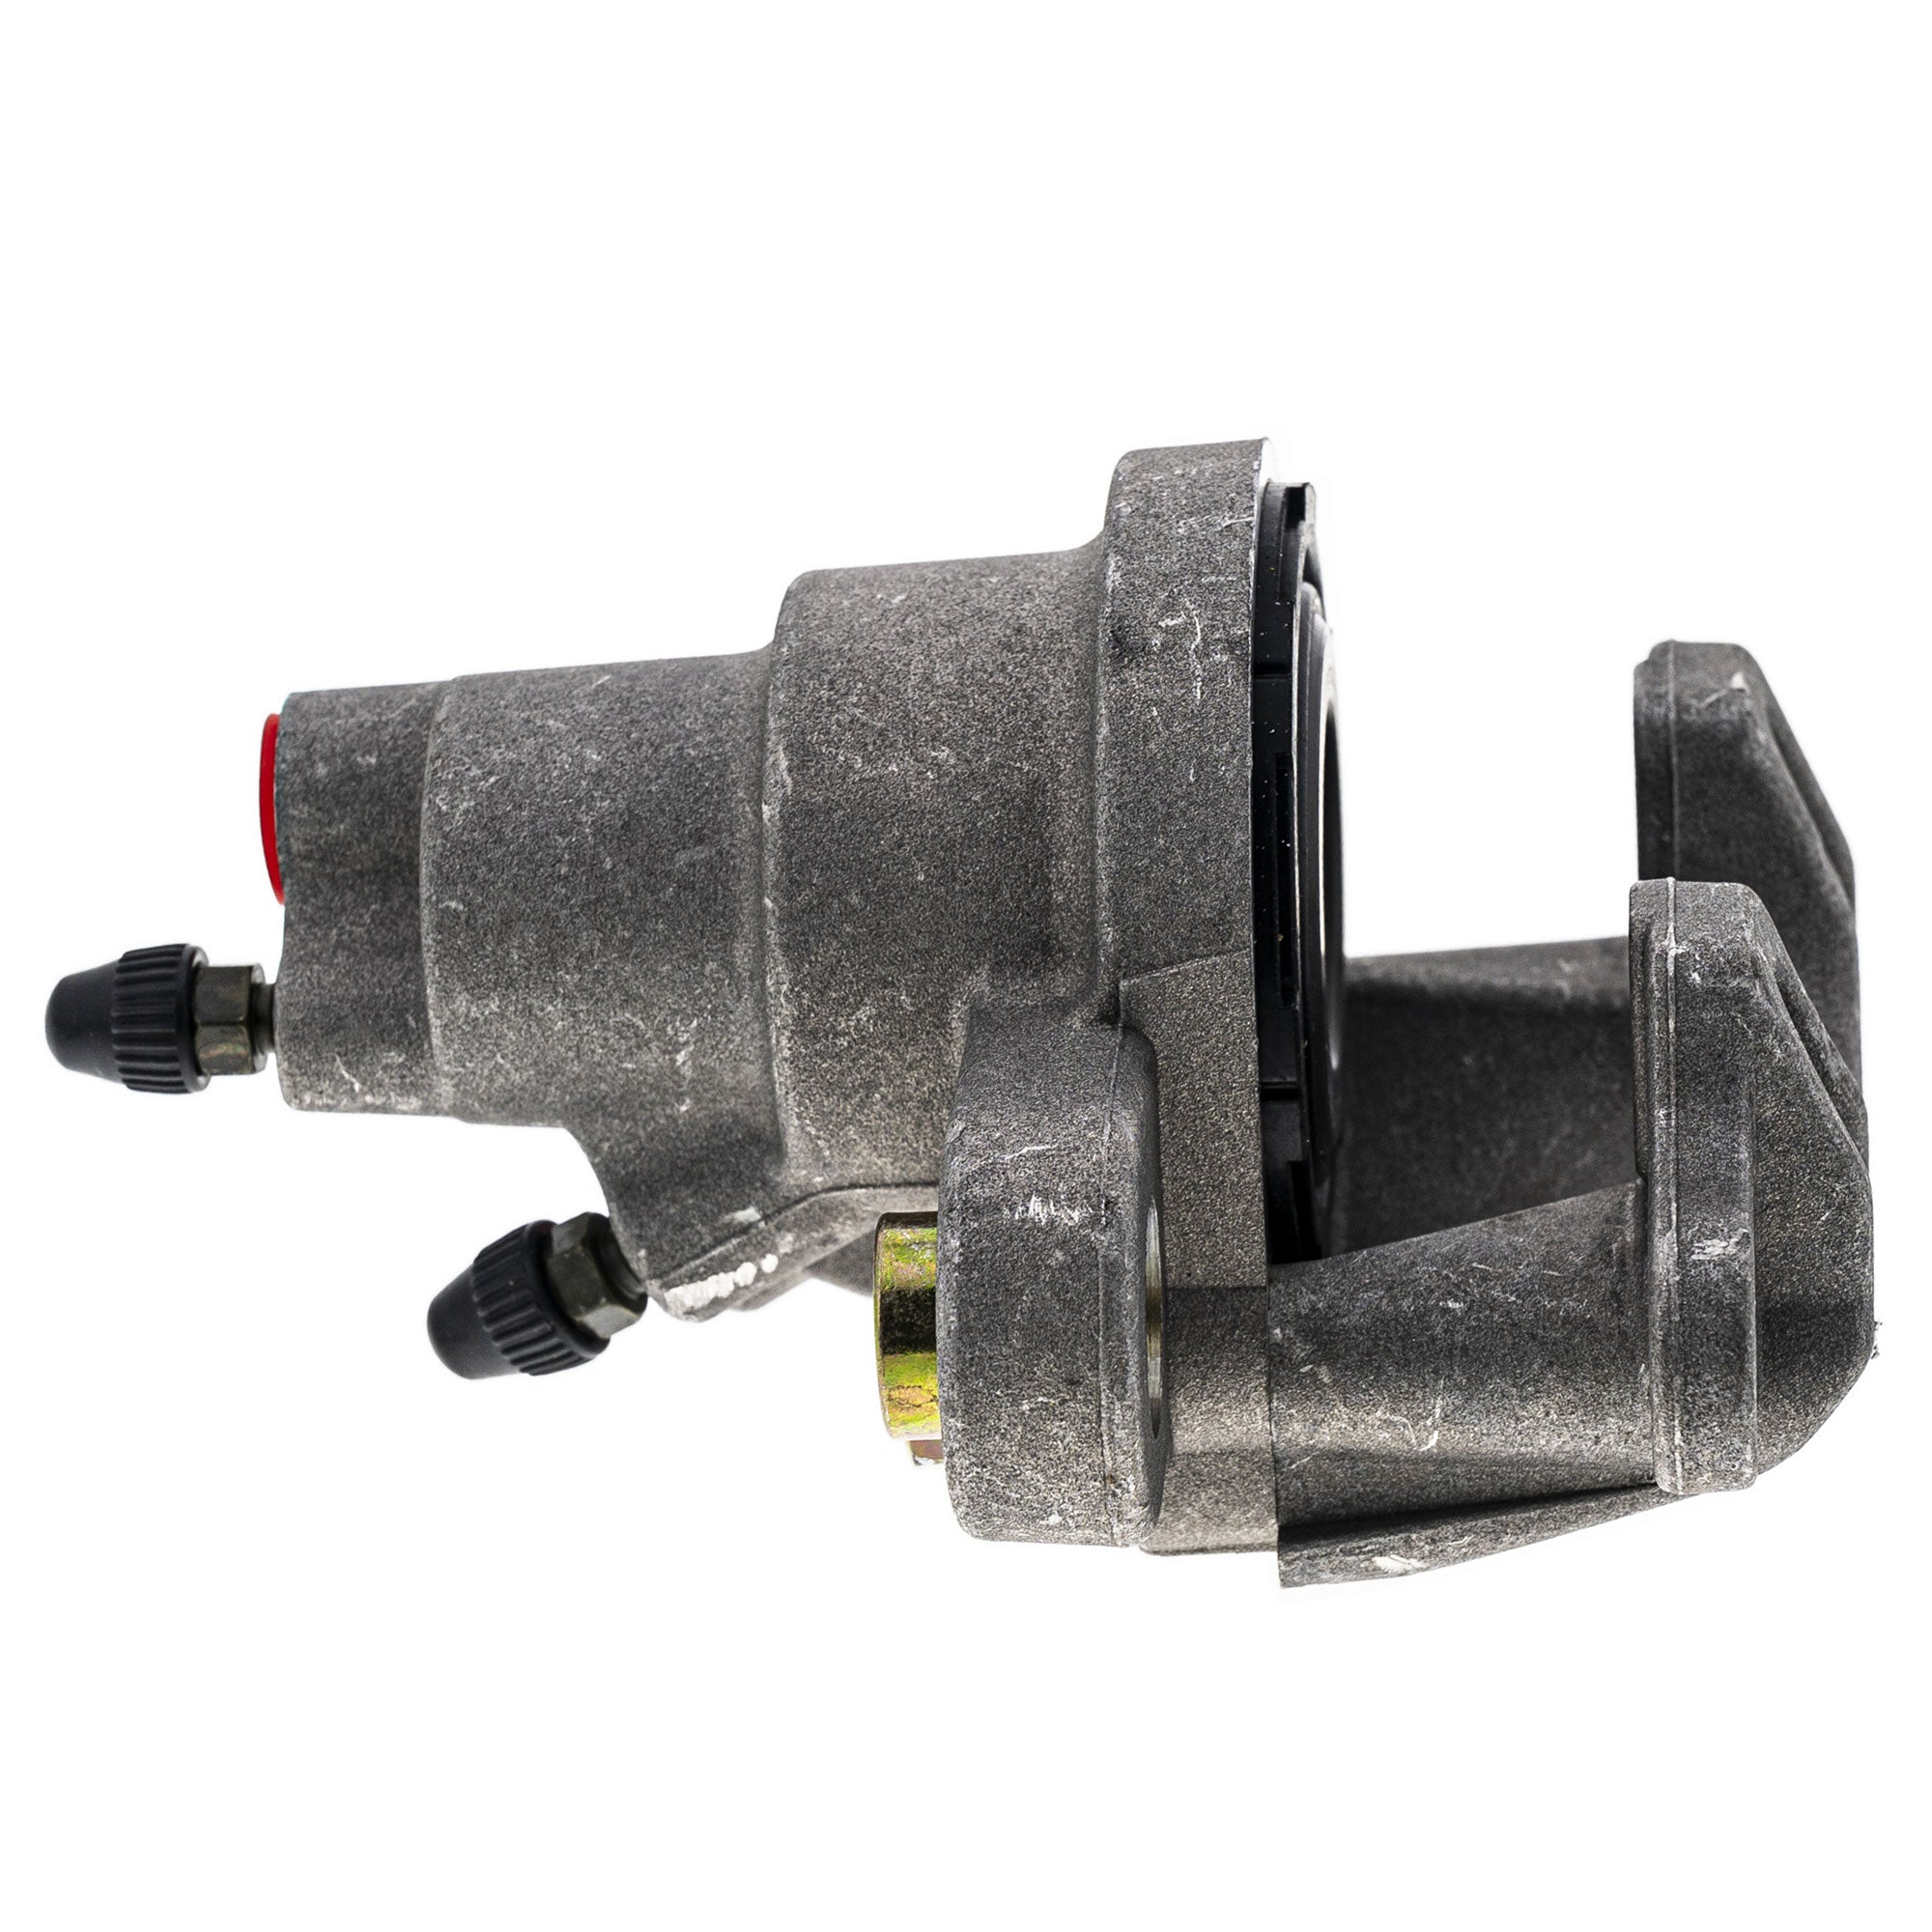 NICHE 519-CCL2253P Brake Caliper Assembly for Polaris Xpedition Trail